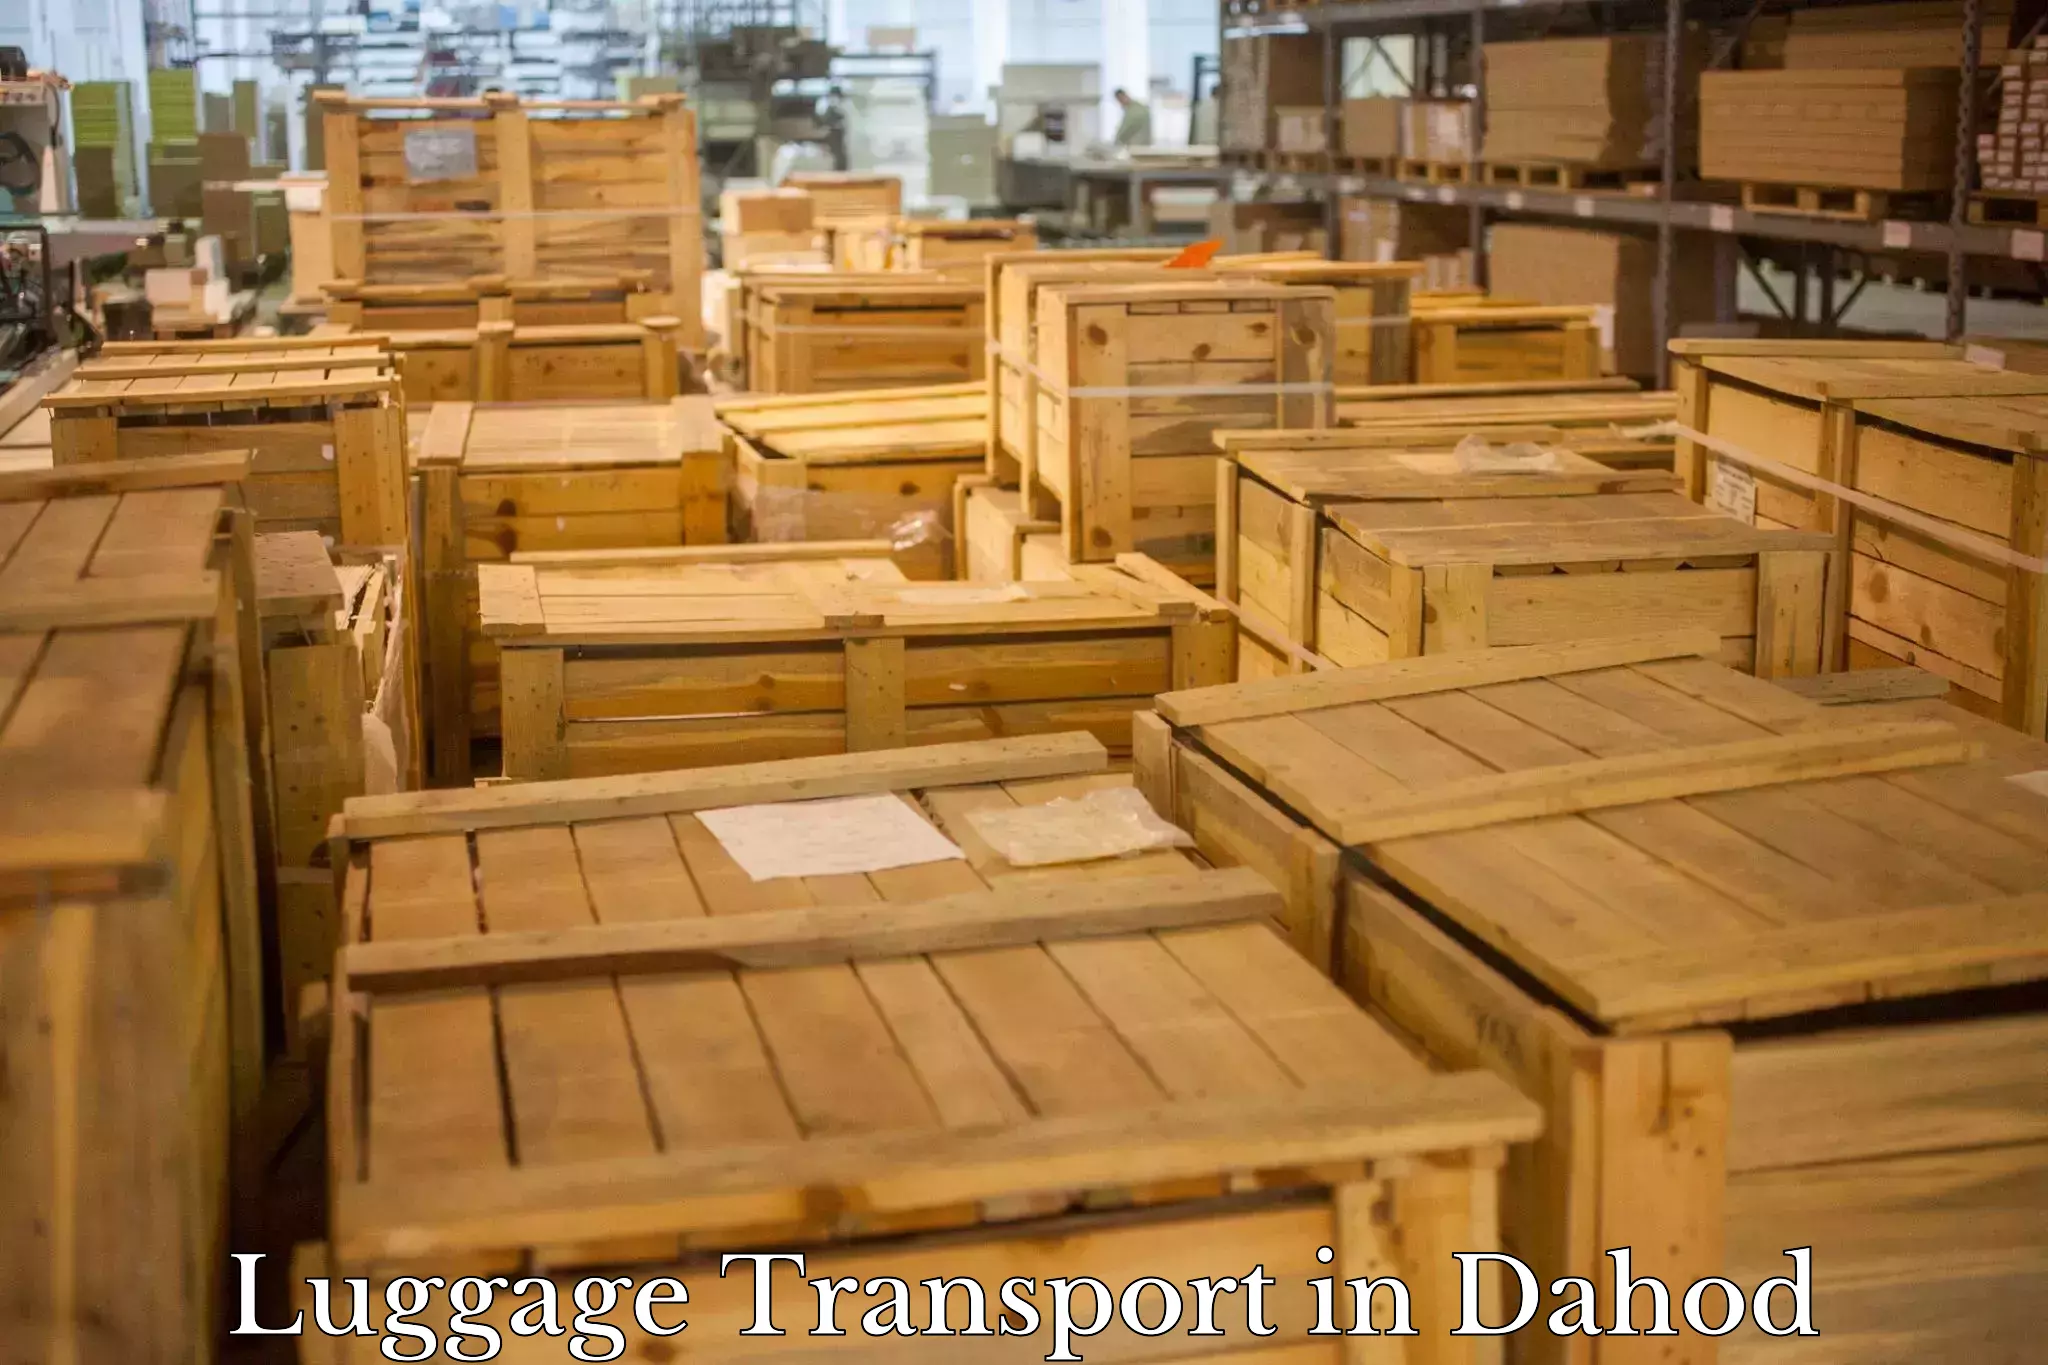 Luggage transport operations in Dahod